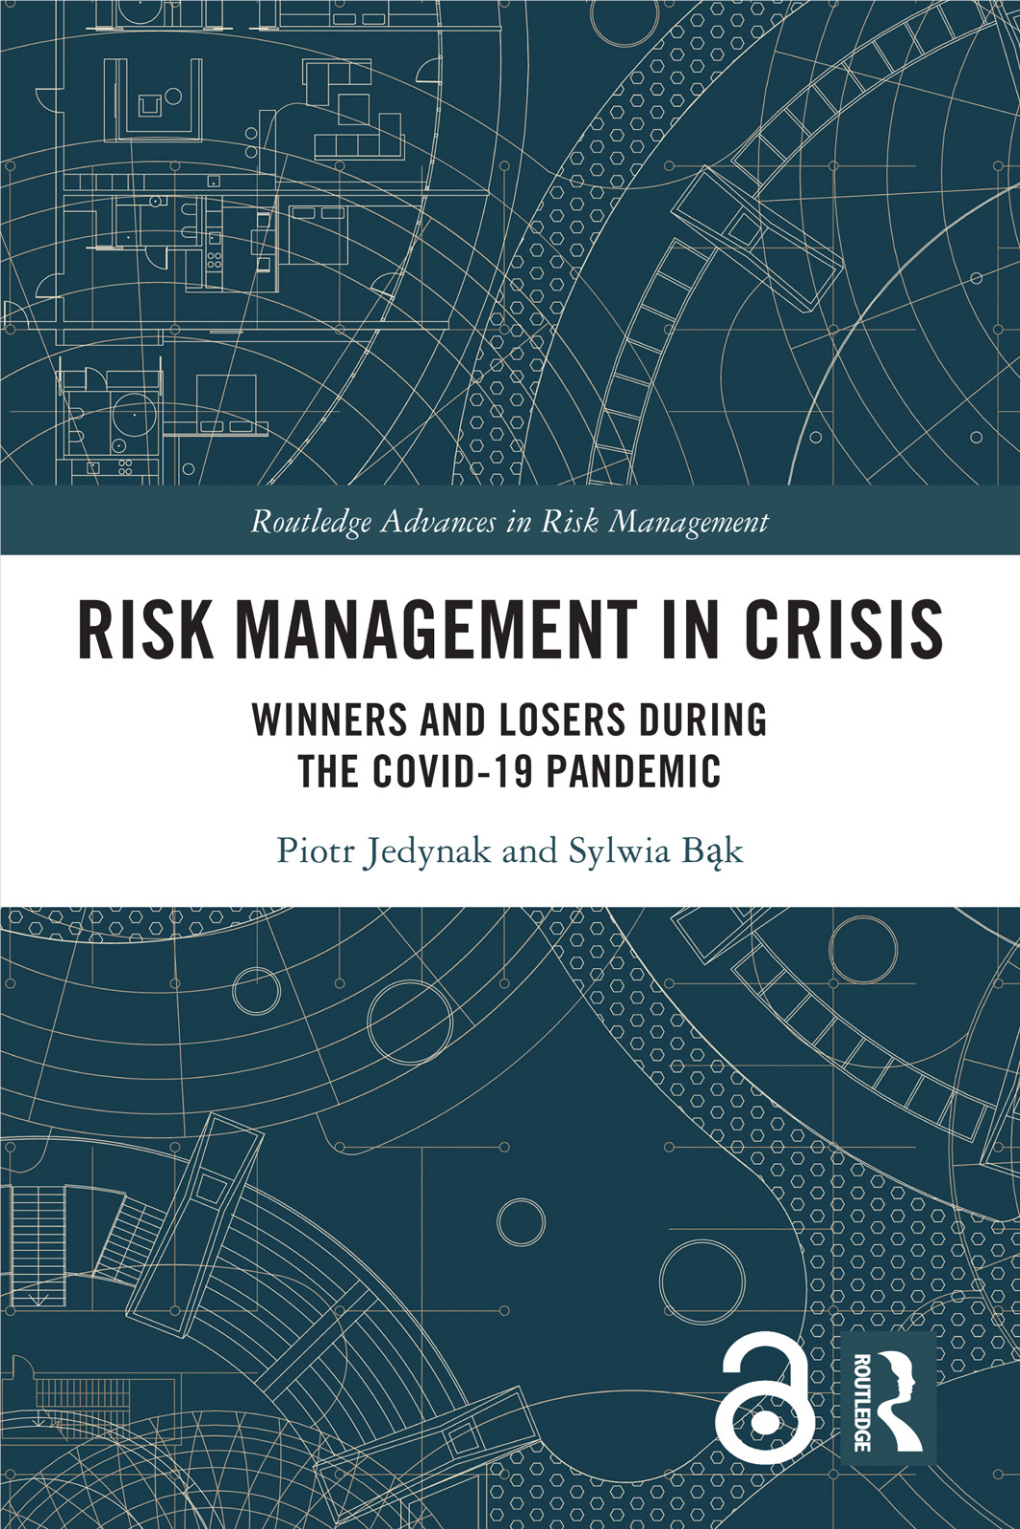 Risk Management in Crisis: Winners and Losers During the COVID-19 Pandemic/Piotr Jedynak and Sylwia Bąk